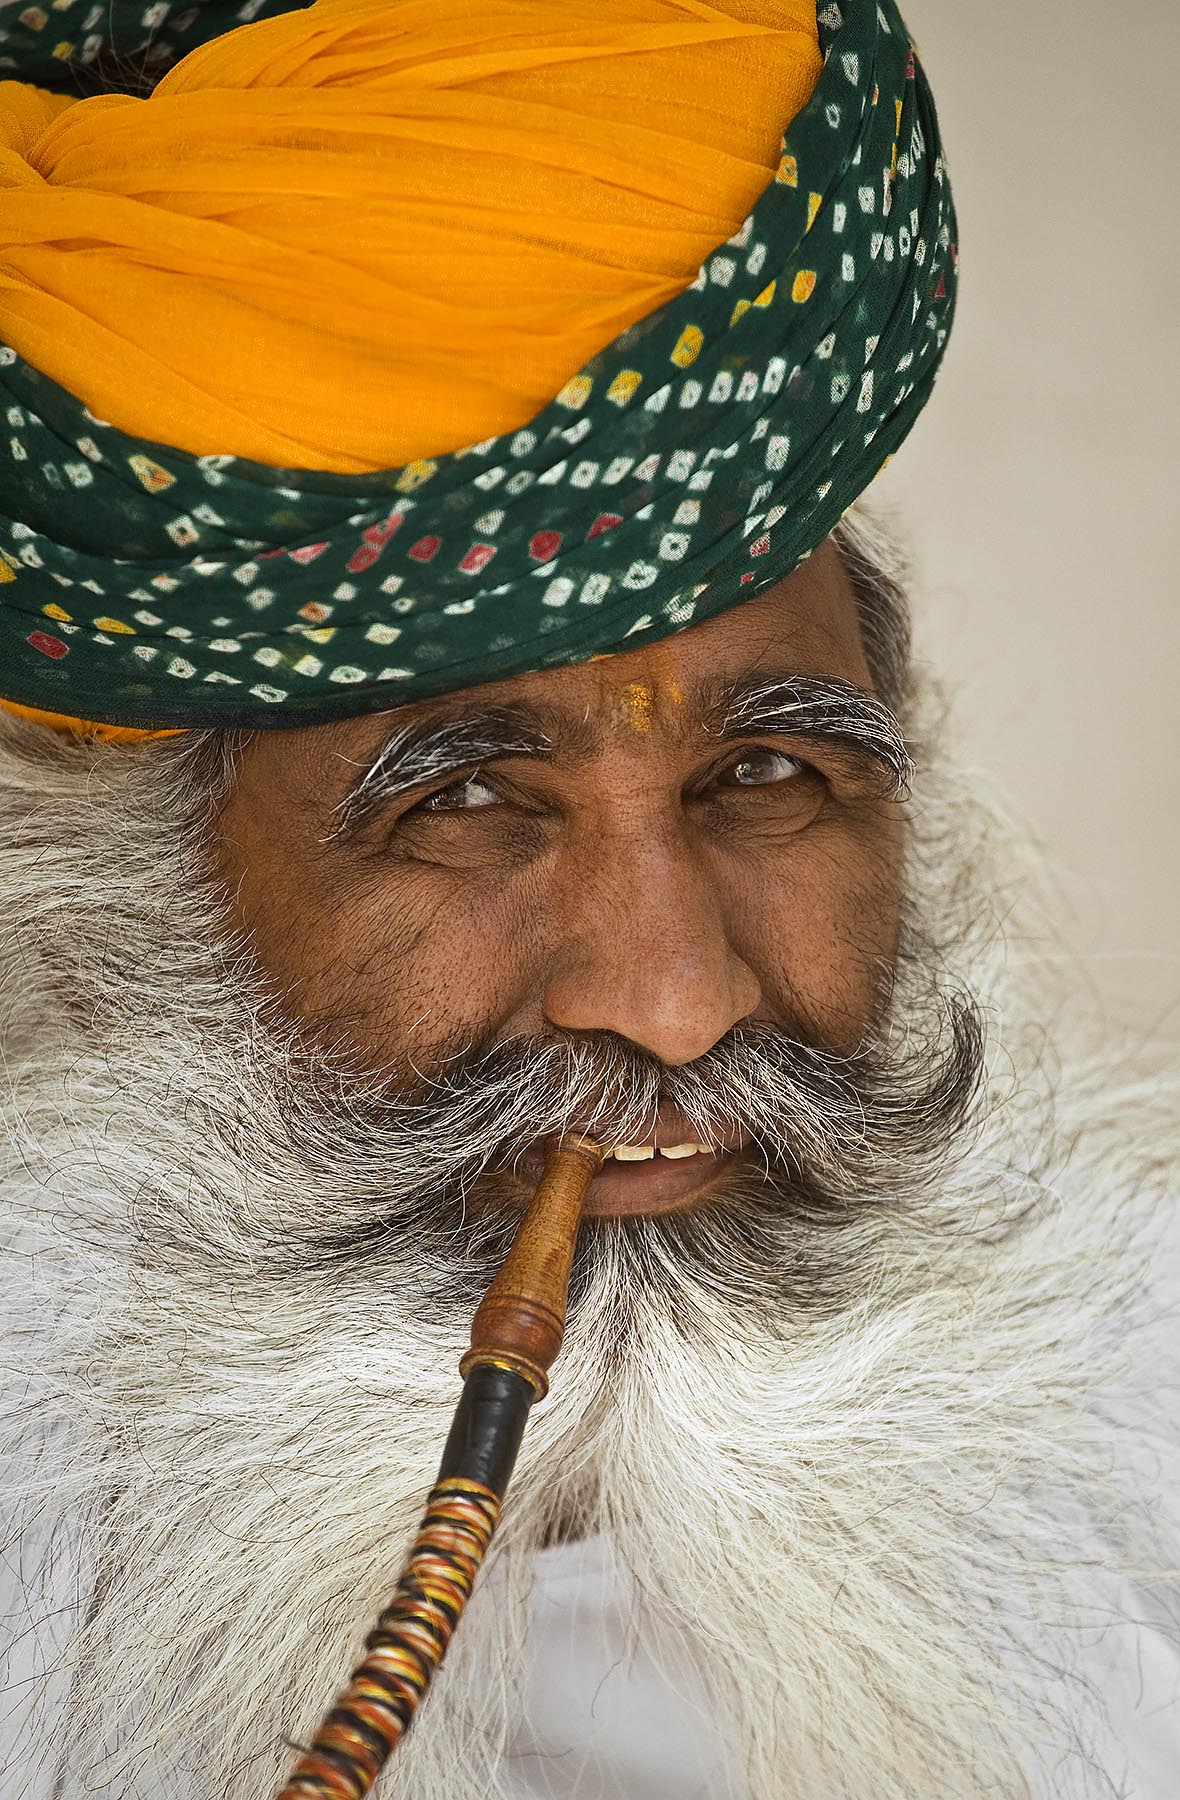 A turbaned Rajasthani man demonstrates the use of a HOOKAH PIPE in the MEHERANGARH FORT - JOHDPUR, RAJASTHAN, INDIA